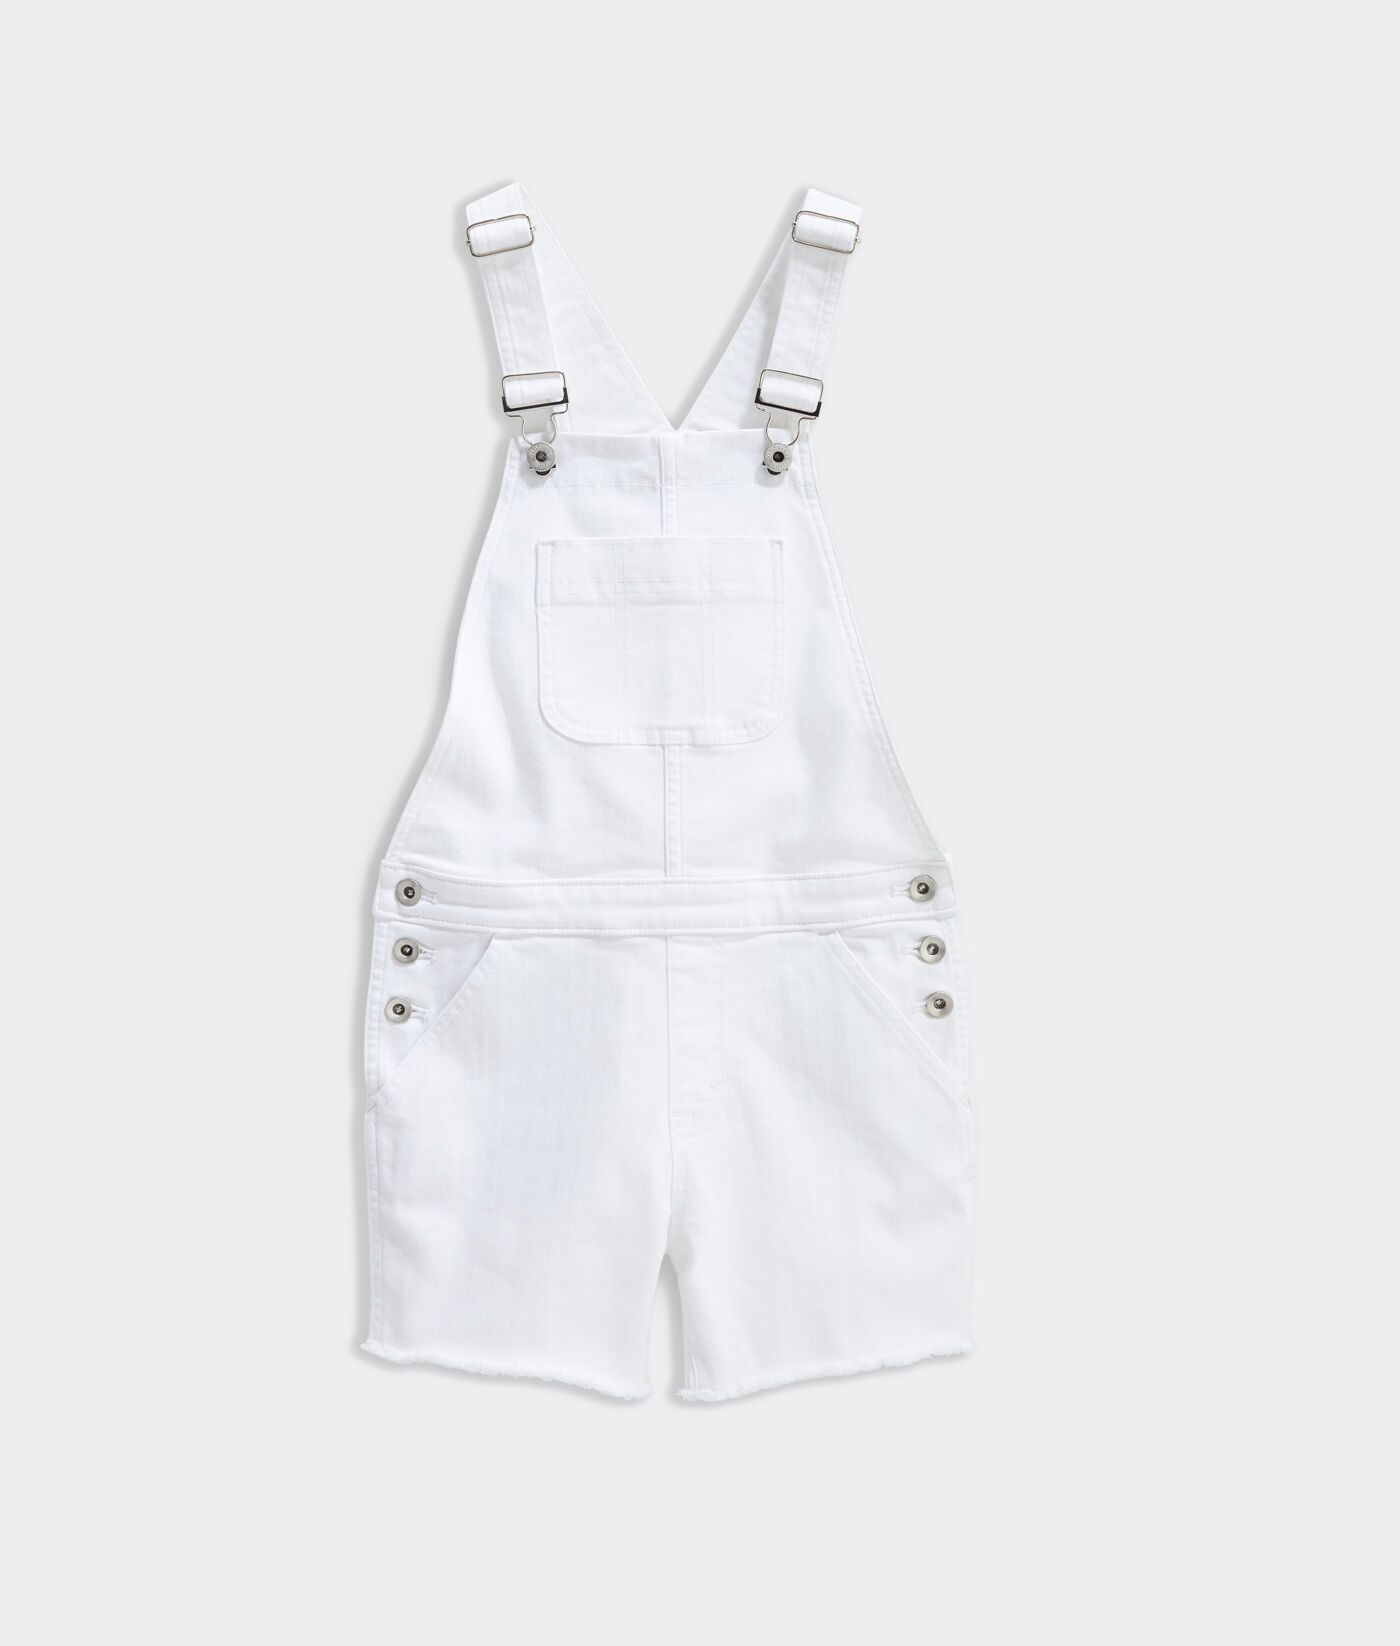 white jean overall shorts